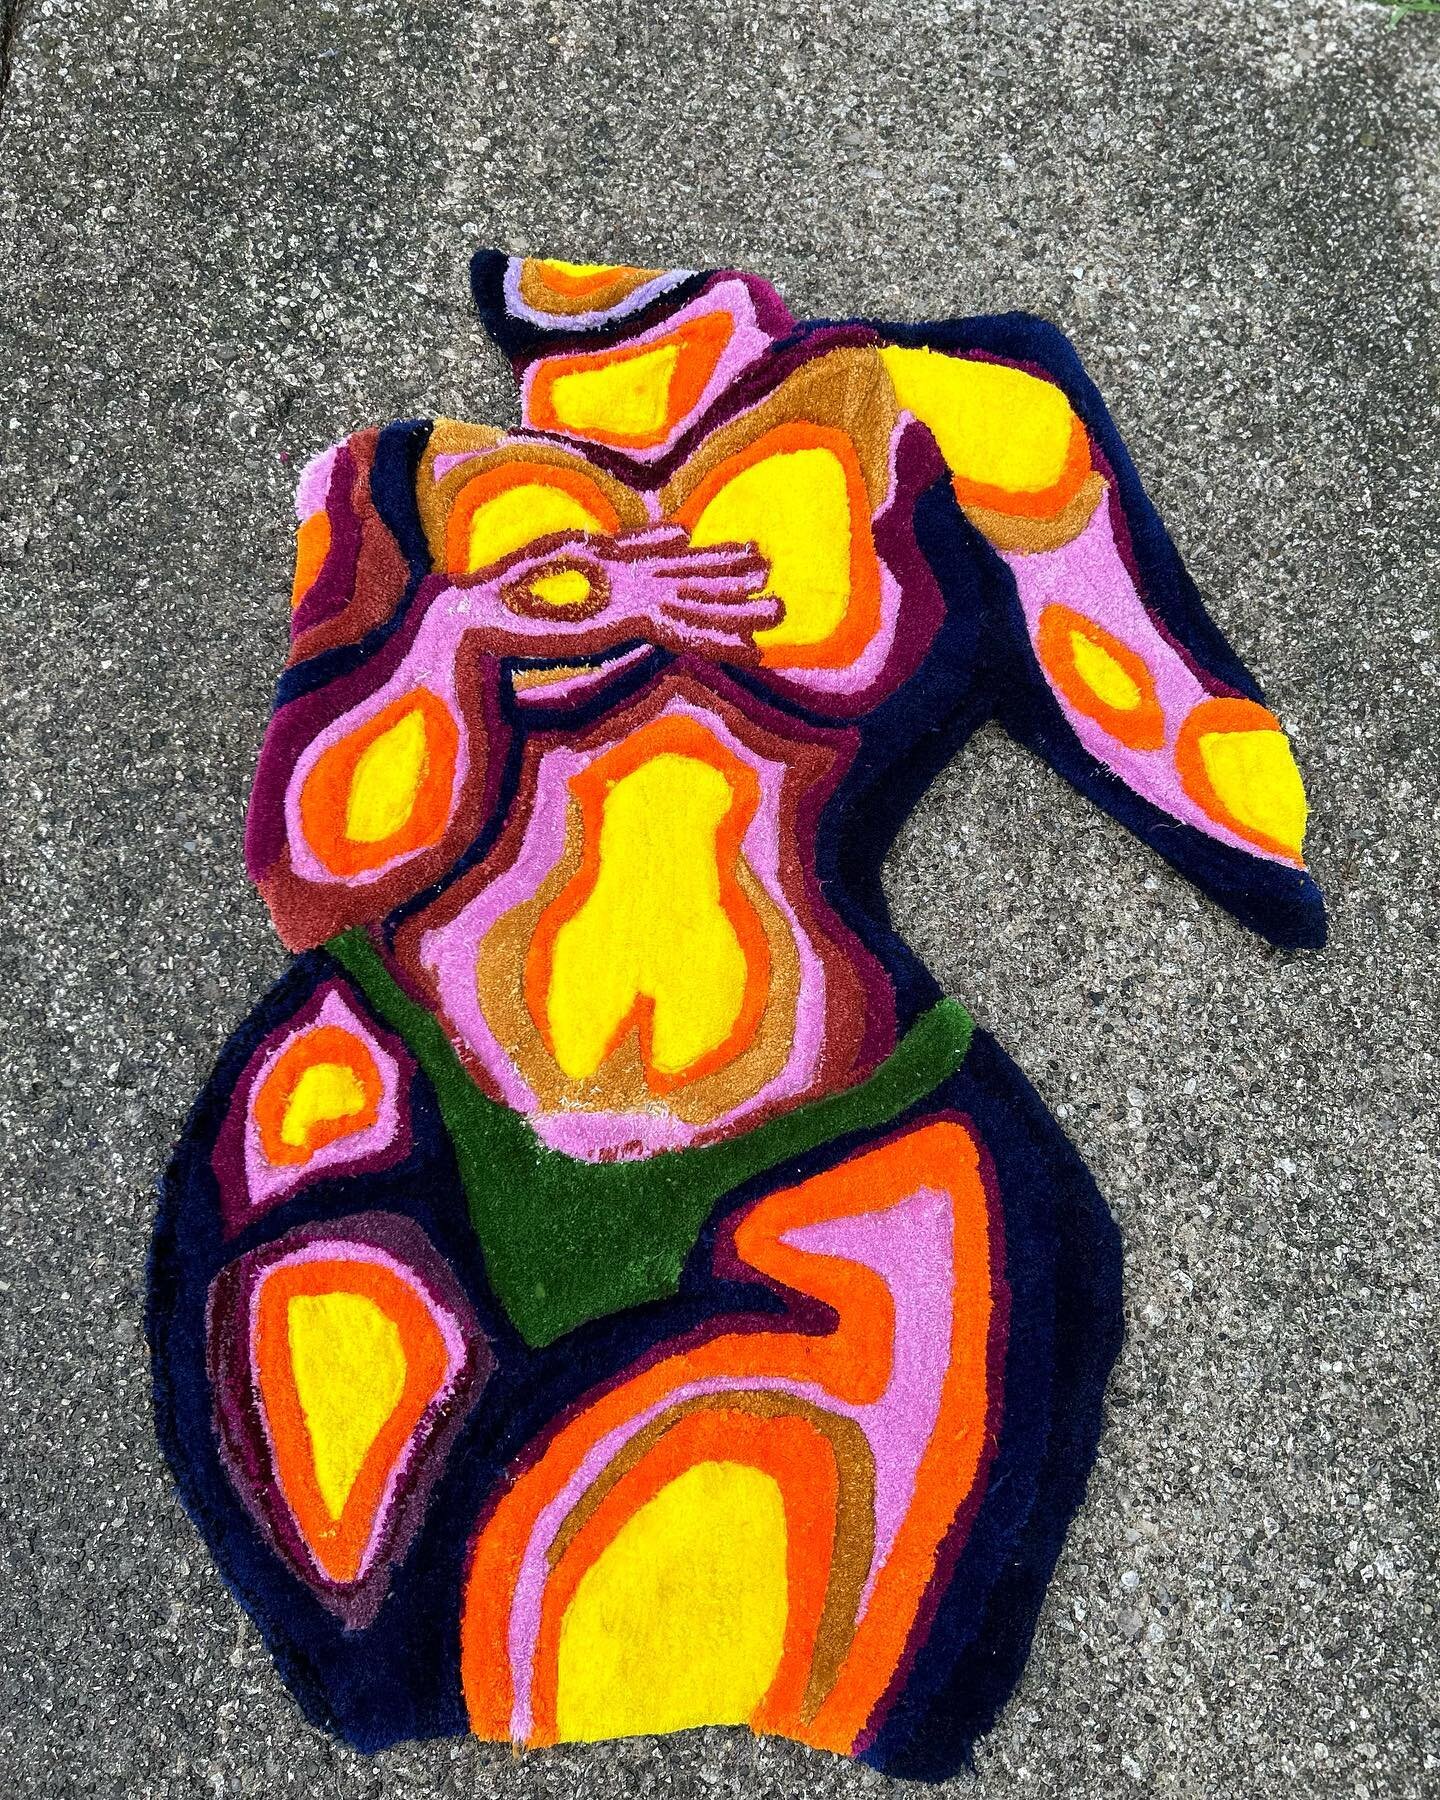 Thermal Inspired Pattern Lady 5ft

Commission by @nxperienced 
#rugs #rugtufting #rugart #thermal #rugsusa #woman #model